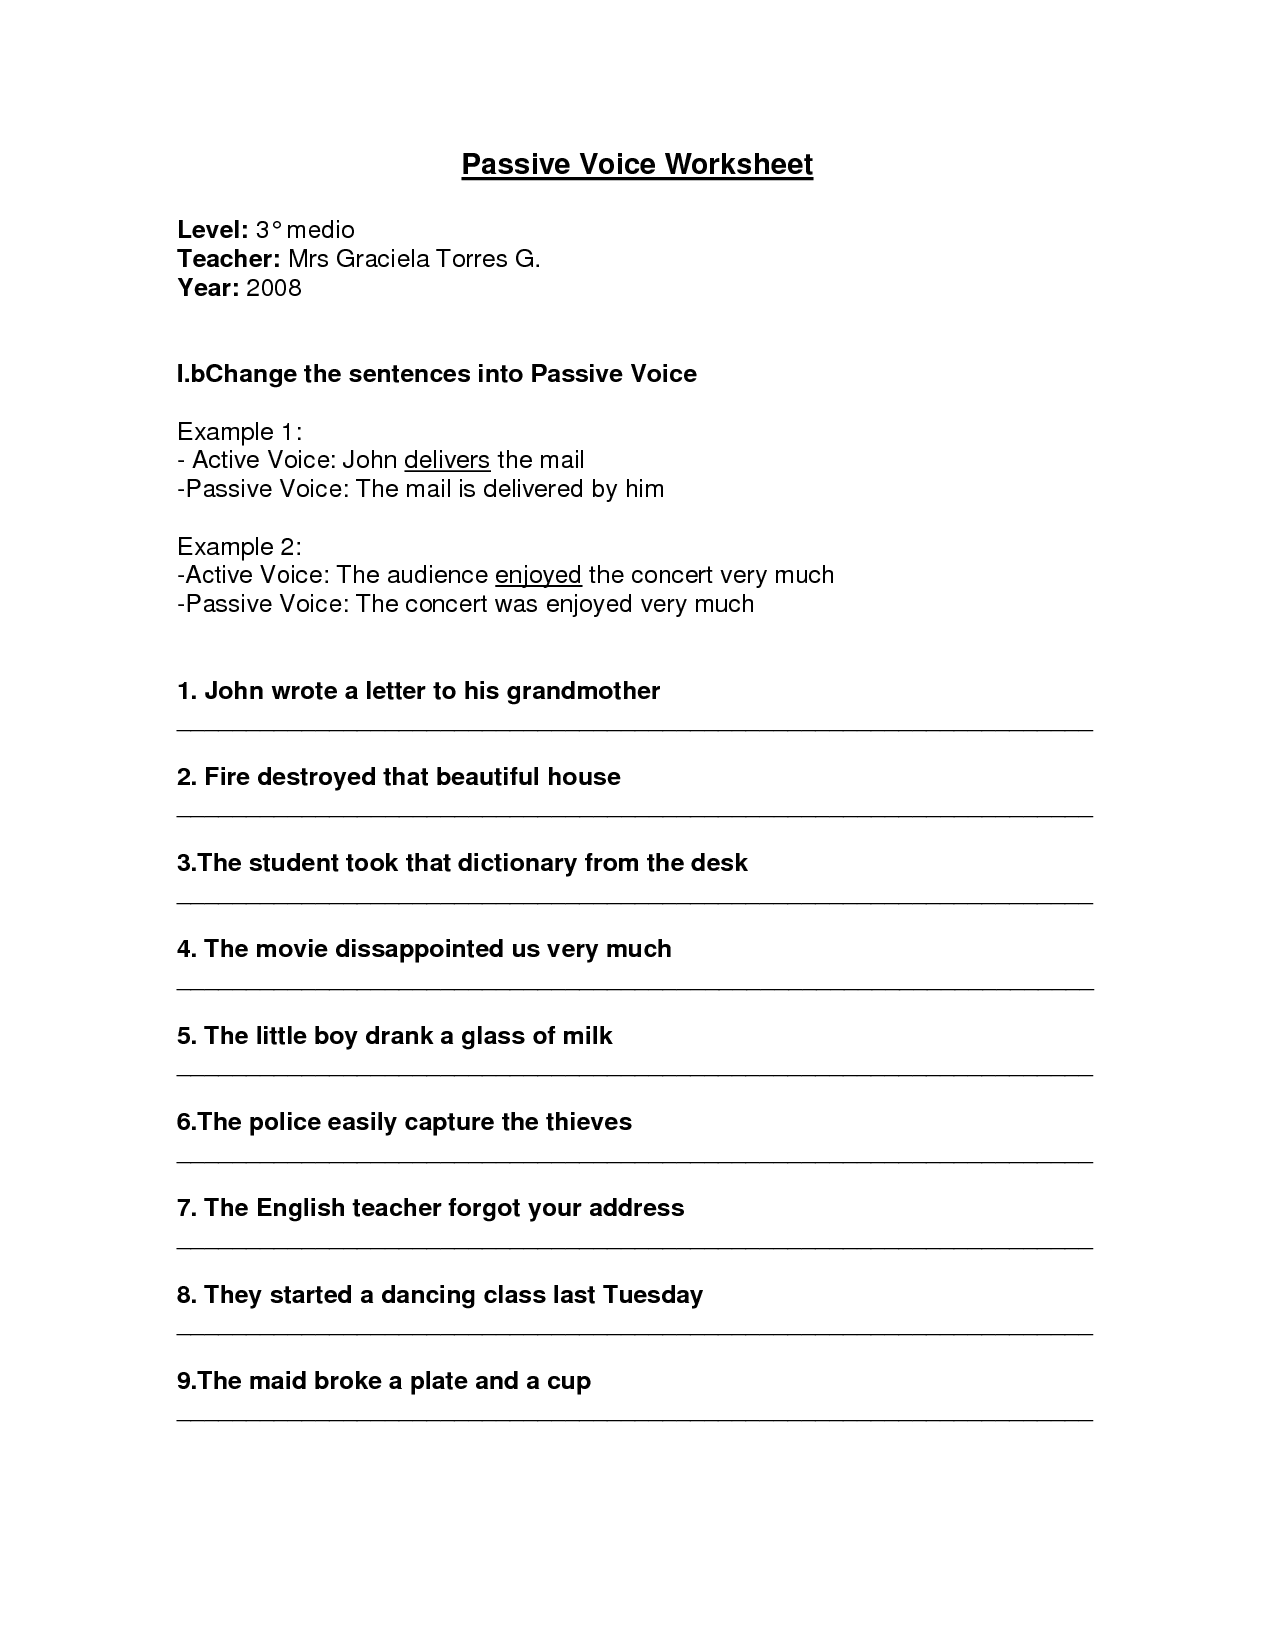 rewrite-these-sentences-by-using-participial-phrase-esl-worksheet-by-son1qs